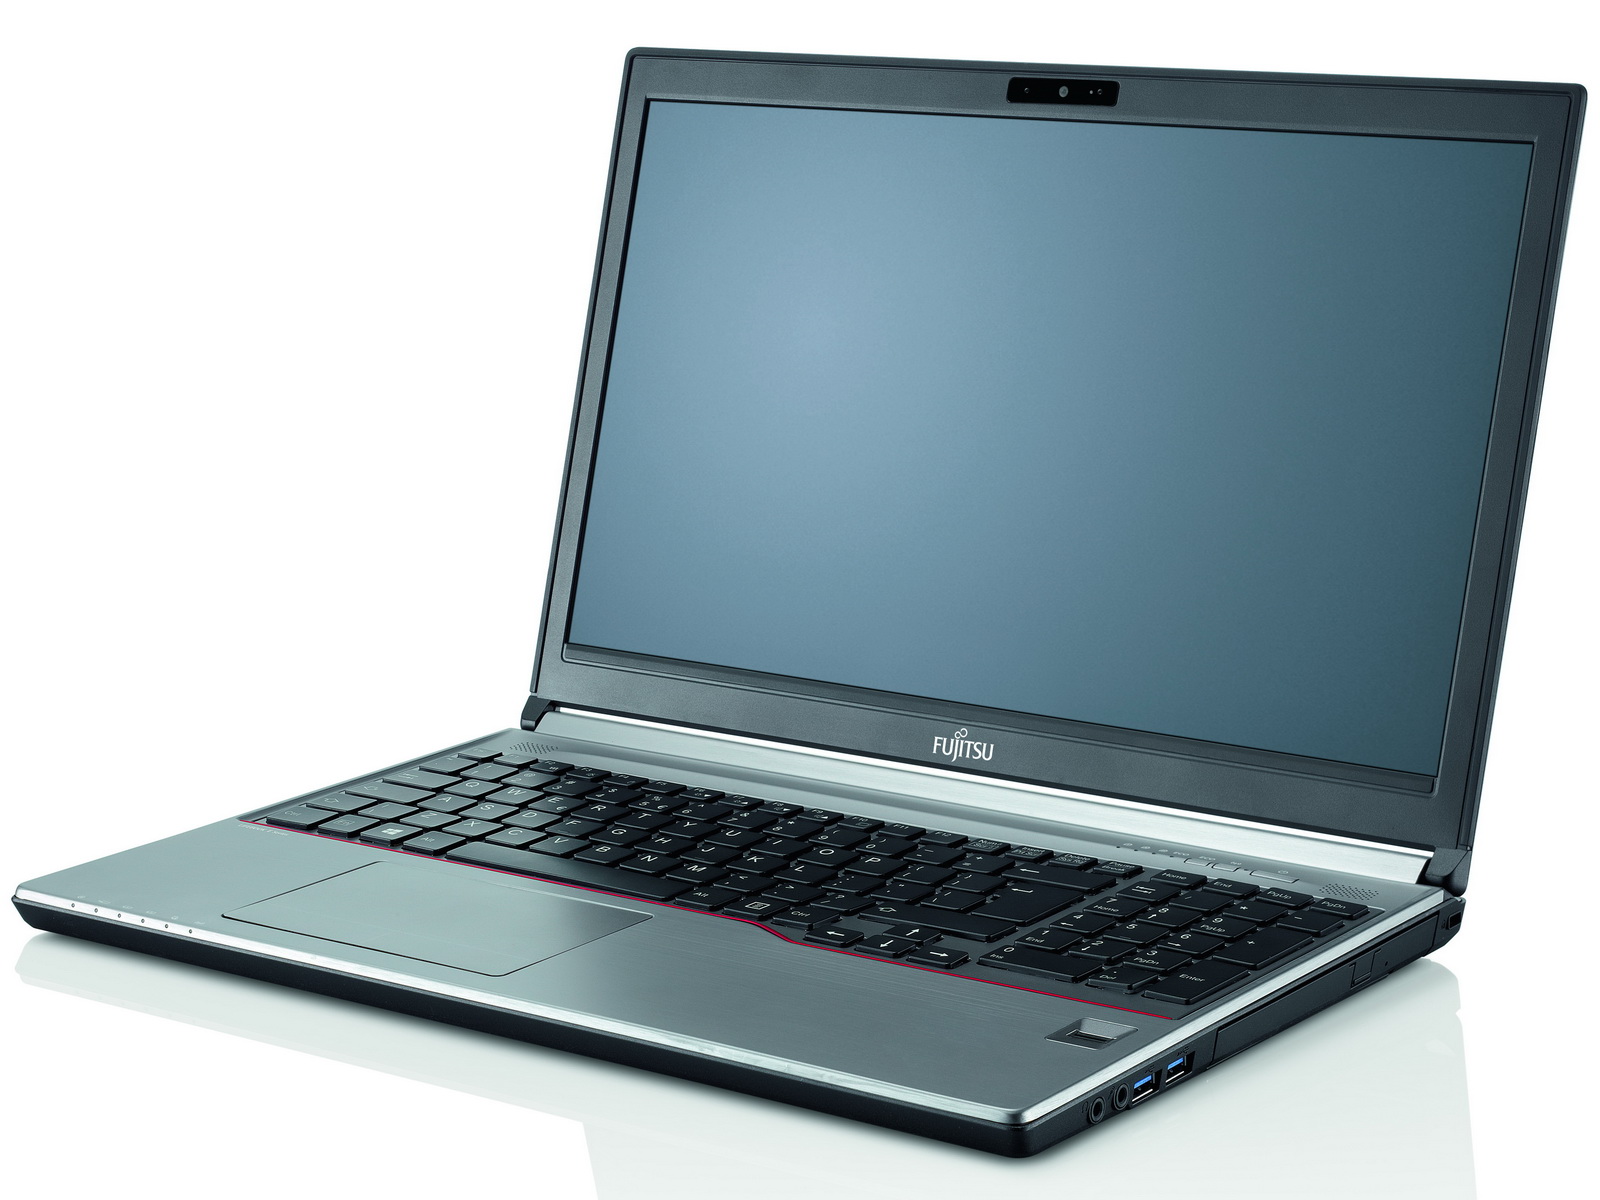 Fujitsu expands LifeBook E series with new models - NotebookCheck.net News